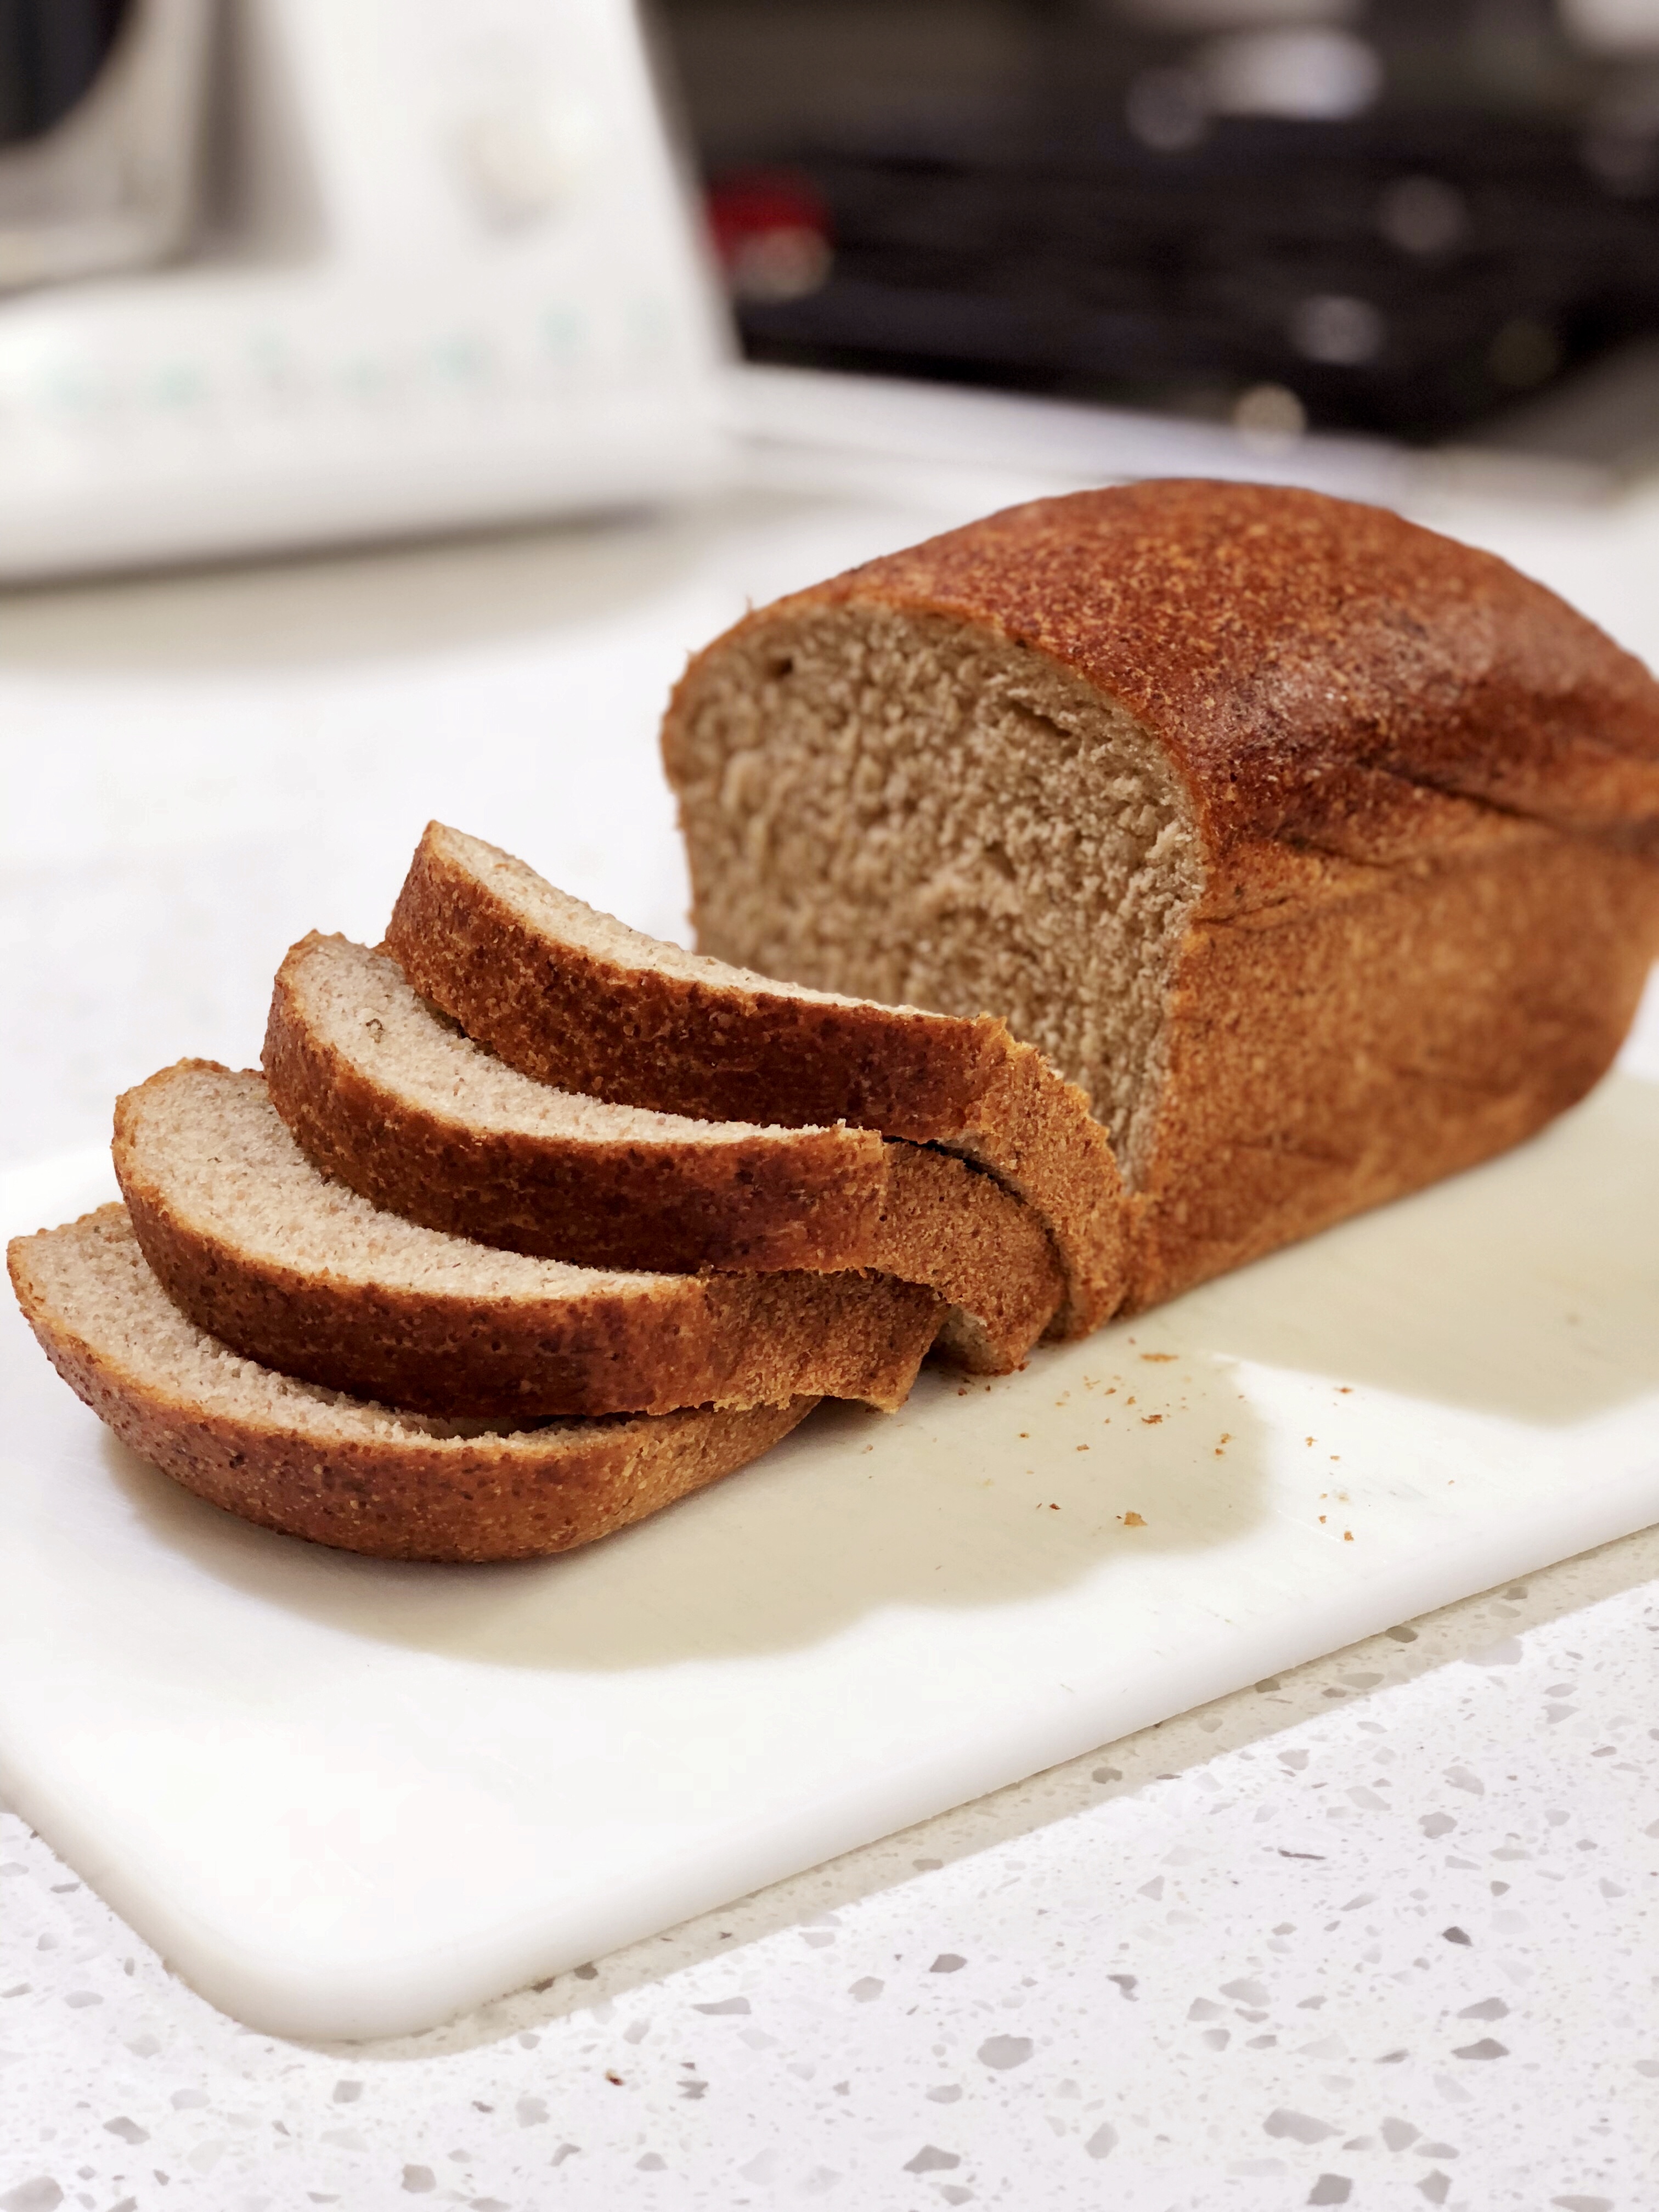 https://cookingwithchefbryan.com/wp-content/uploads/2018/10/Caraway-and-Dill-Bread.jpg